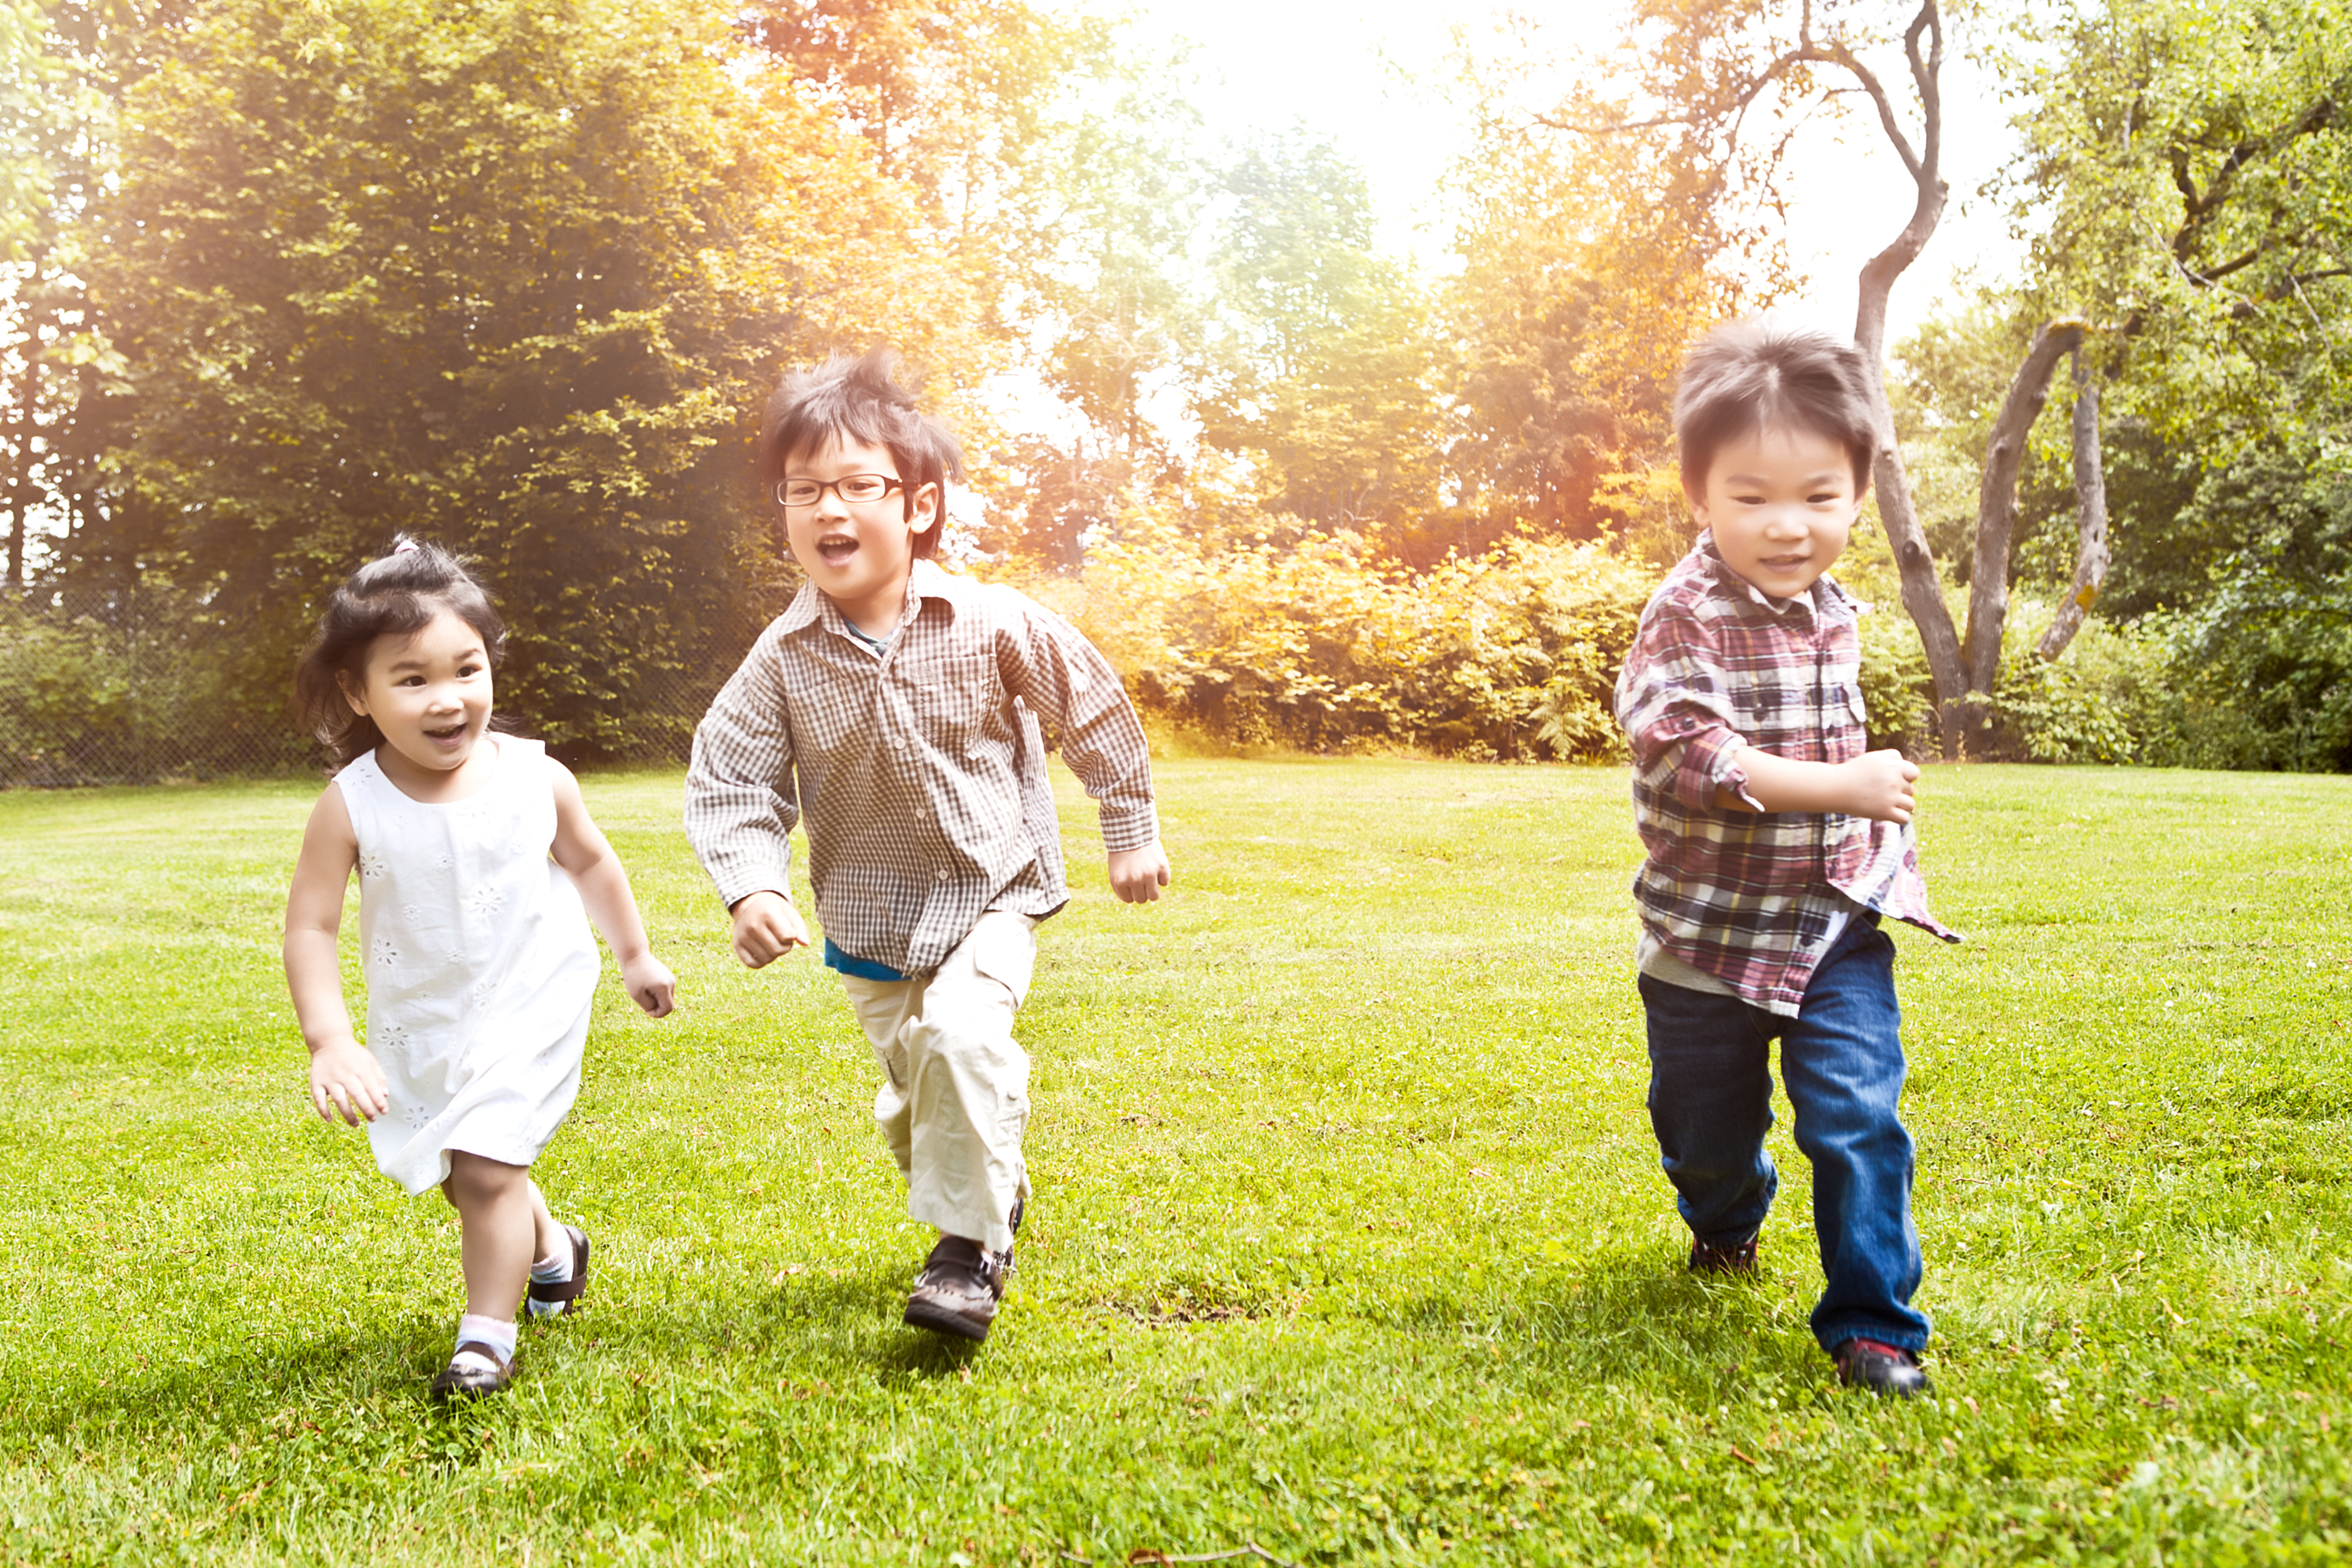 A shot of three Asian kids running in a park (focus in the middle kid)